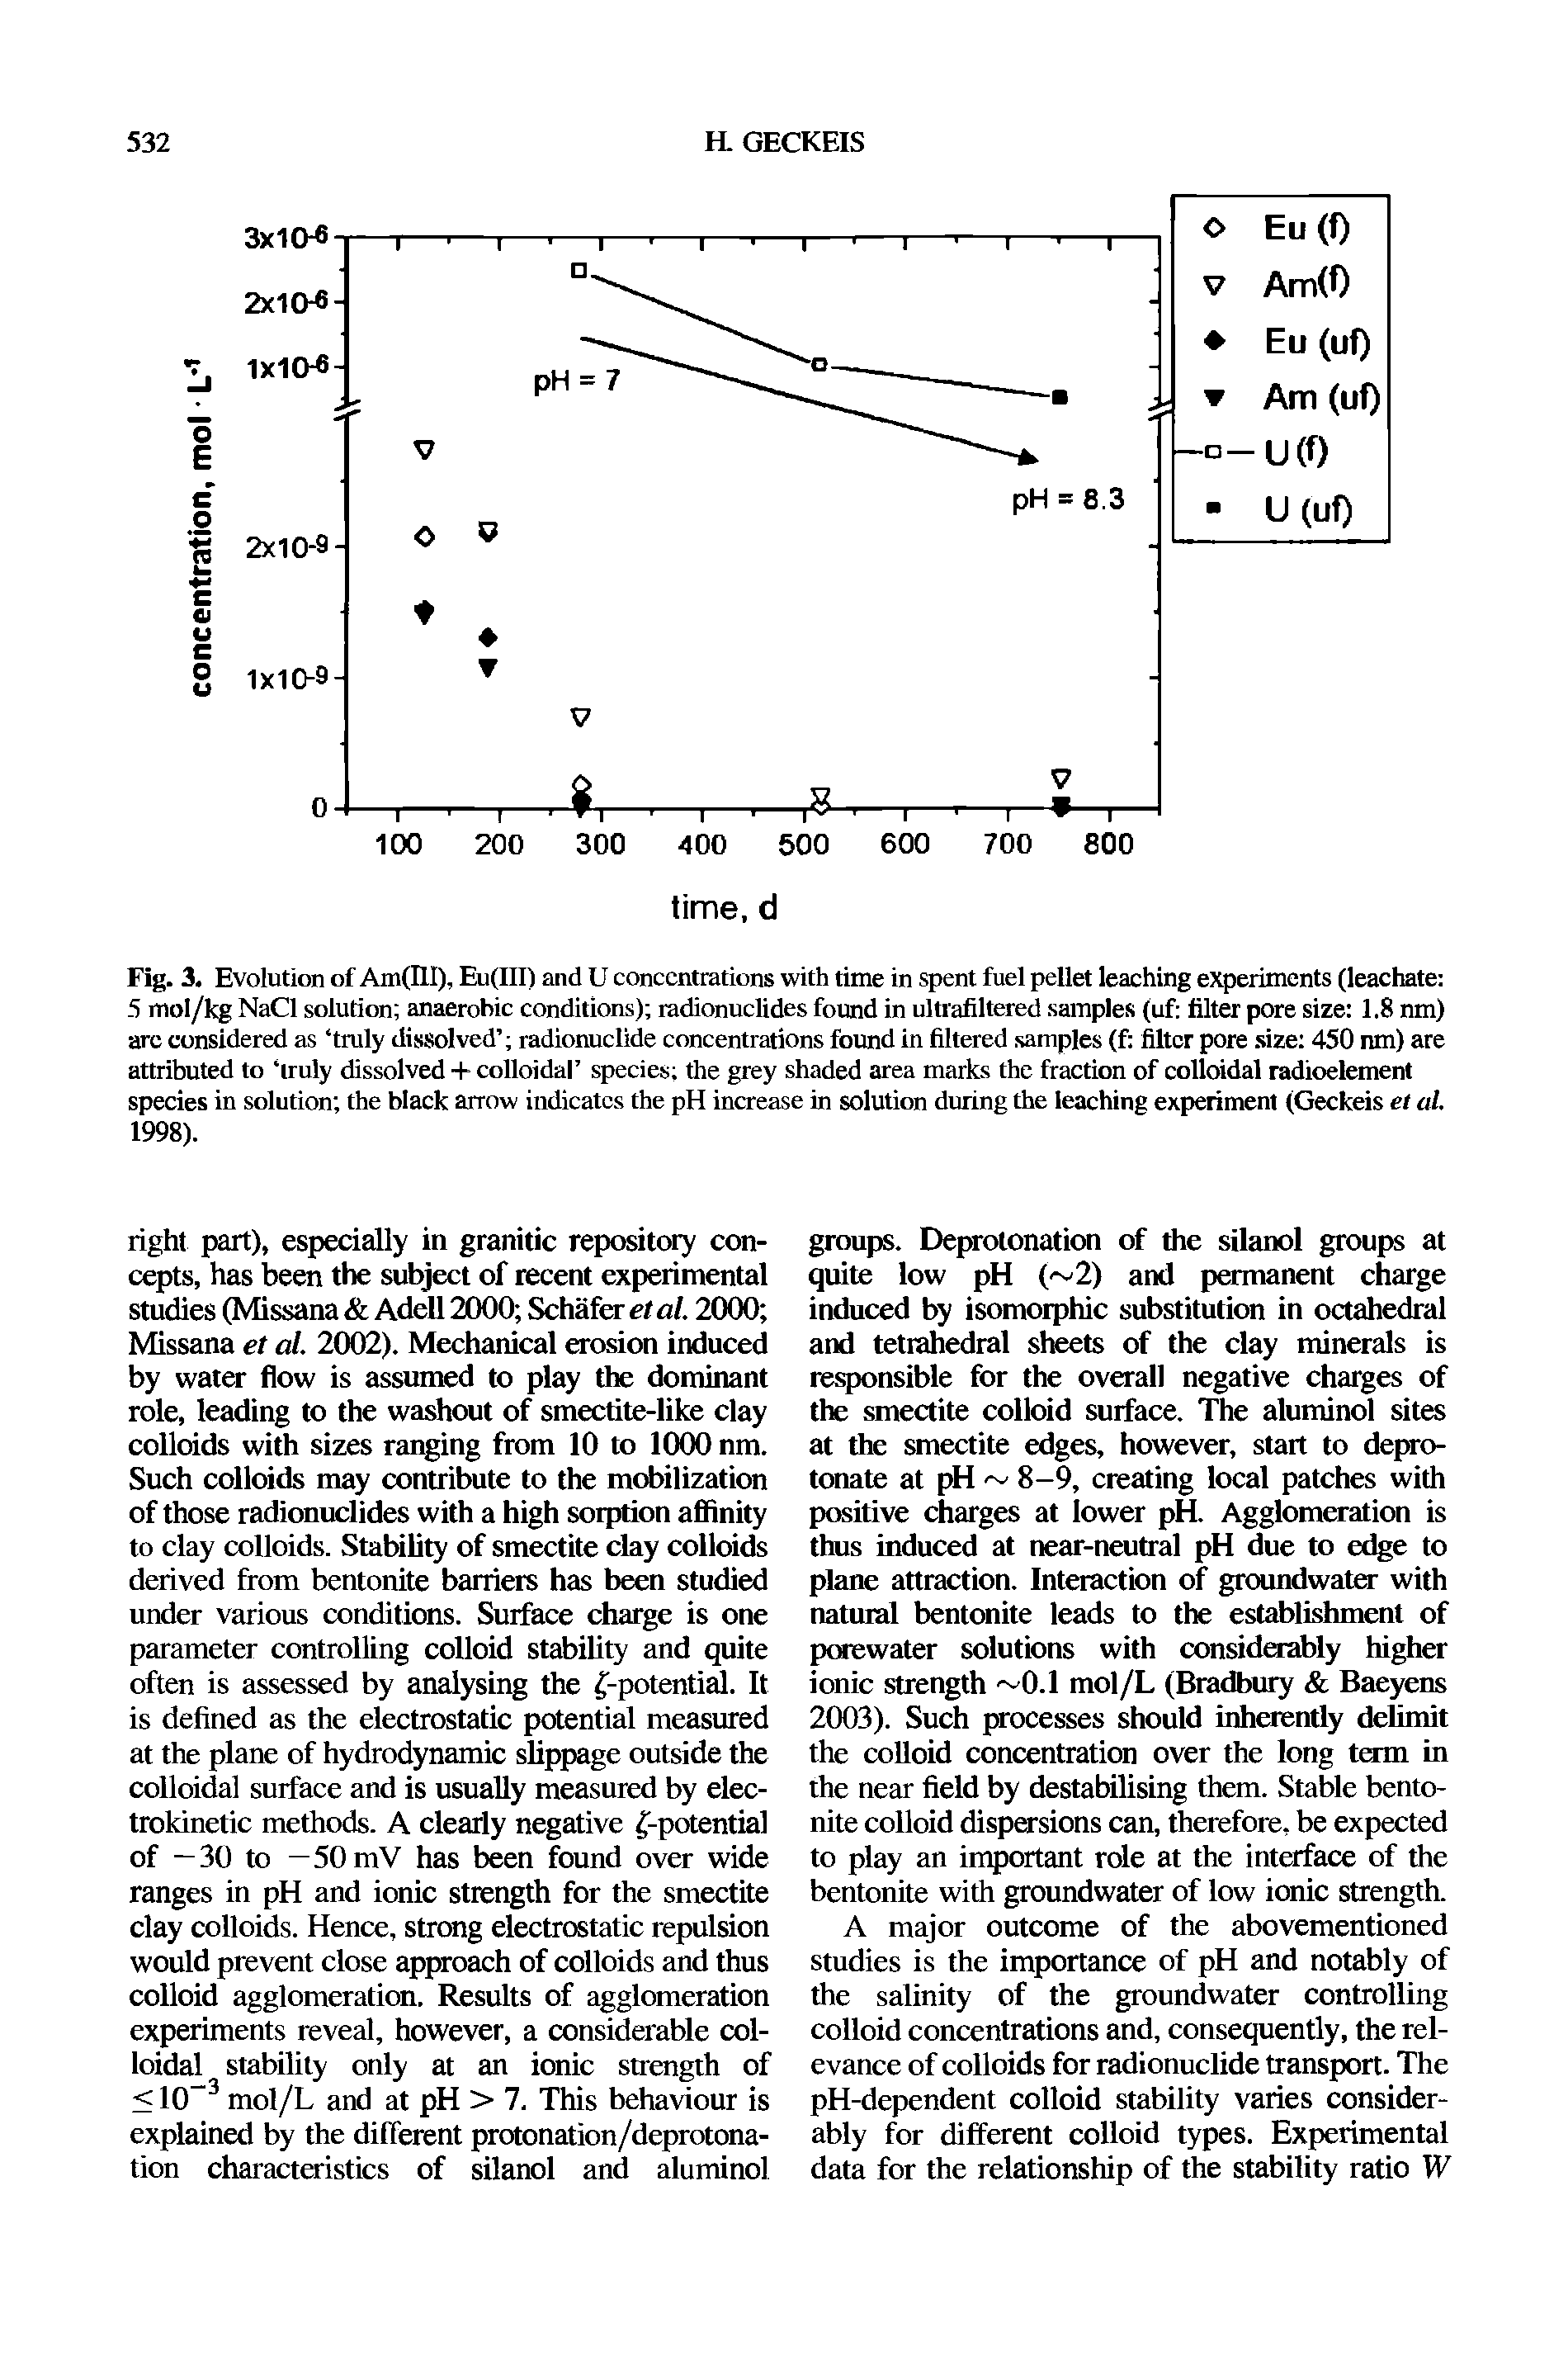 Fig. 3, Evolution of Am(HI), Eu(III) and U concentrations with time in spent fuel pellet leaching experiments (leachate 5 mol/kg NaCl solution anaerobic conditions) radionuclides found in ultrafiltered samples (uf filter pore size 1.8 nm) arc considered as truly dissolved radionuclide concentrations found in filtered samples (f filter pore size 450 nm) are attributed to truly dissolved + colloidal species the grey shaded area marks the fraction of colloidal radioelement species in solution the black arrow indicates the pH increase in solution during the leaching experiment (Geckeis et al. 1998).